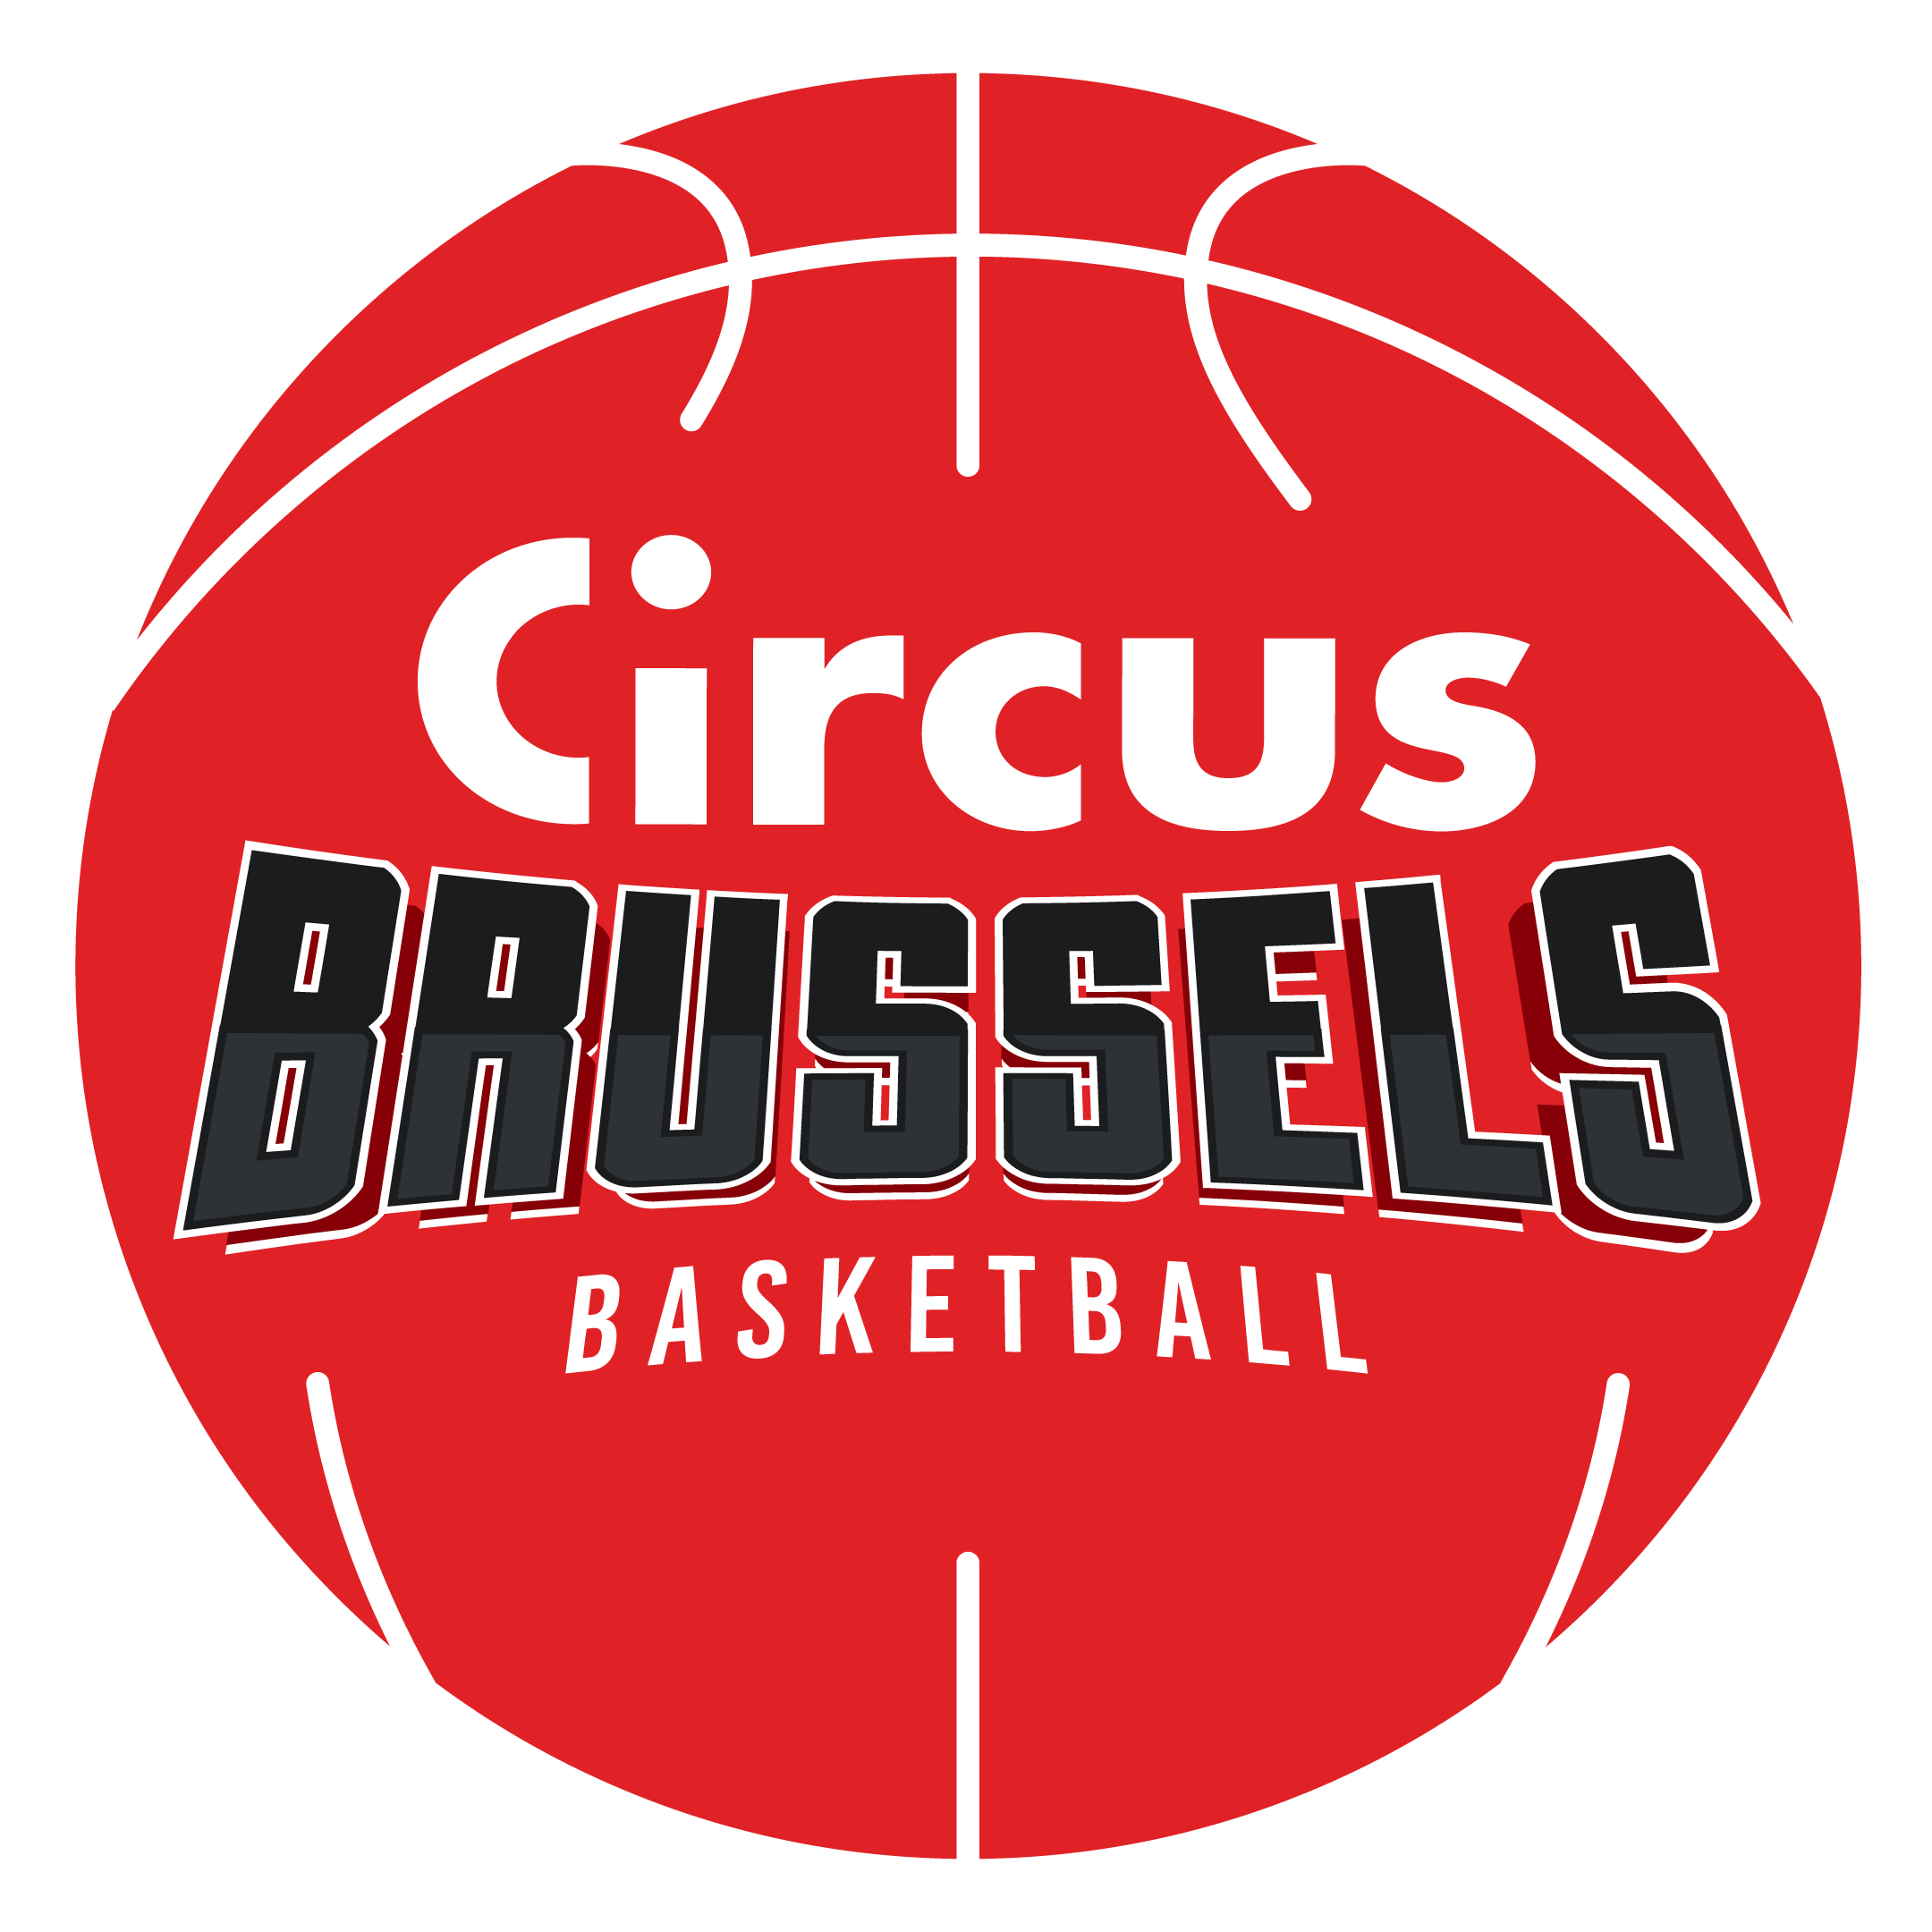 Circus Brussels Basketball BRUSSELS